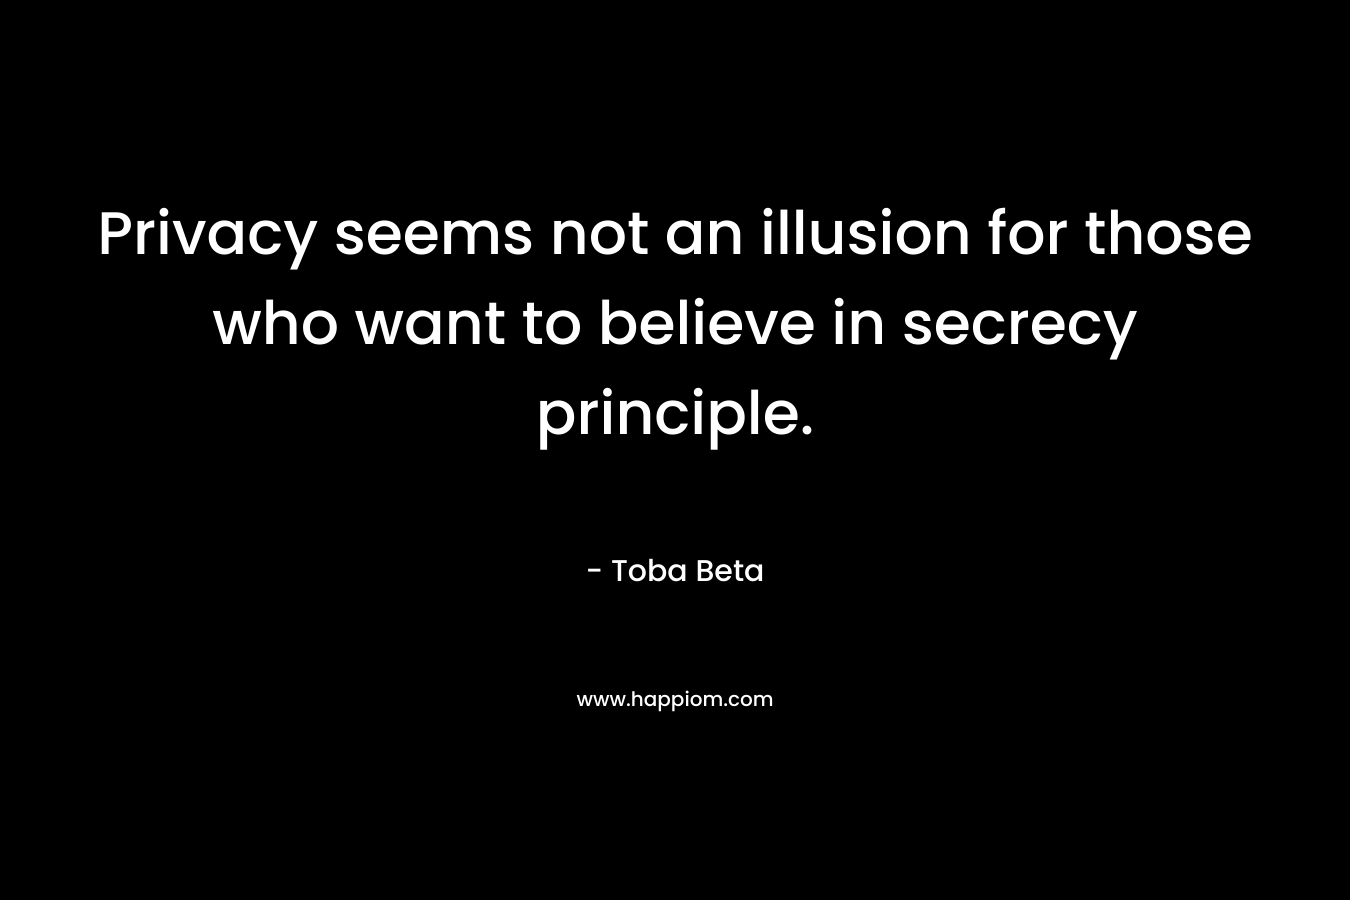 Privacy seems not an illusion for those who want to believe in secrecy principle. – Toba Beta